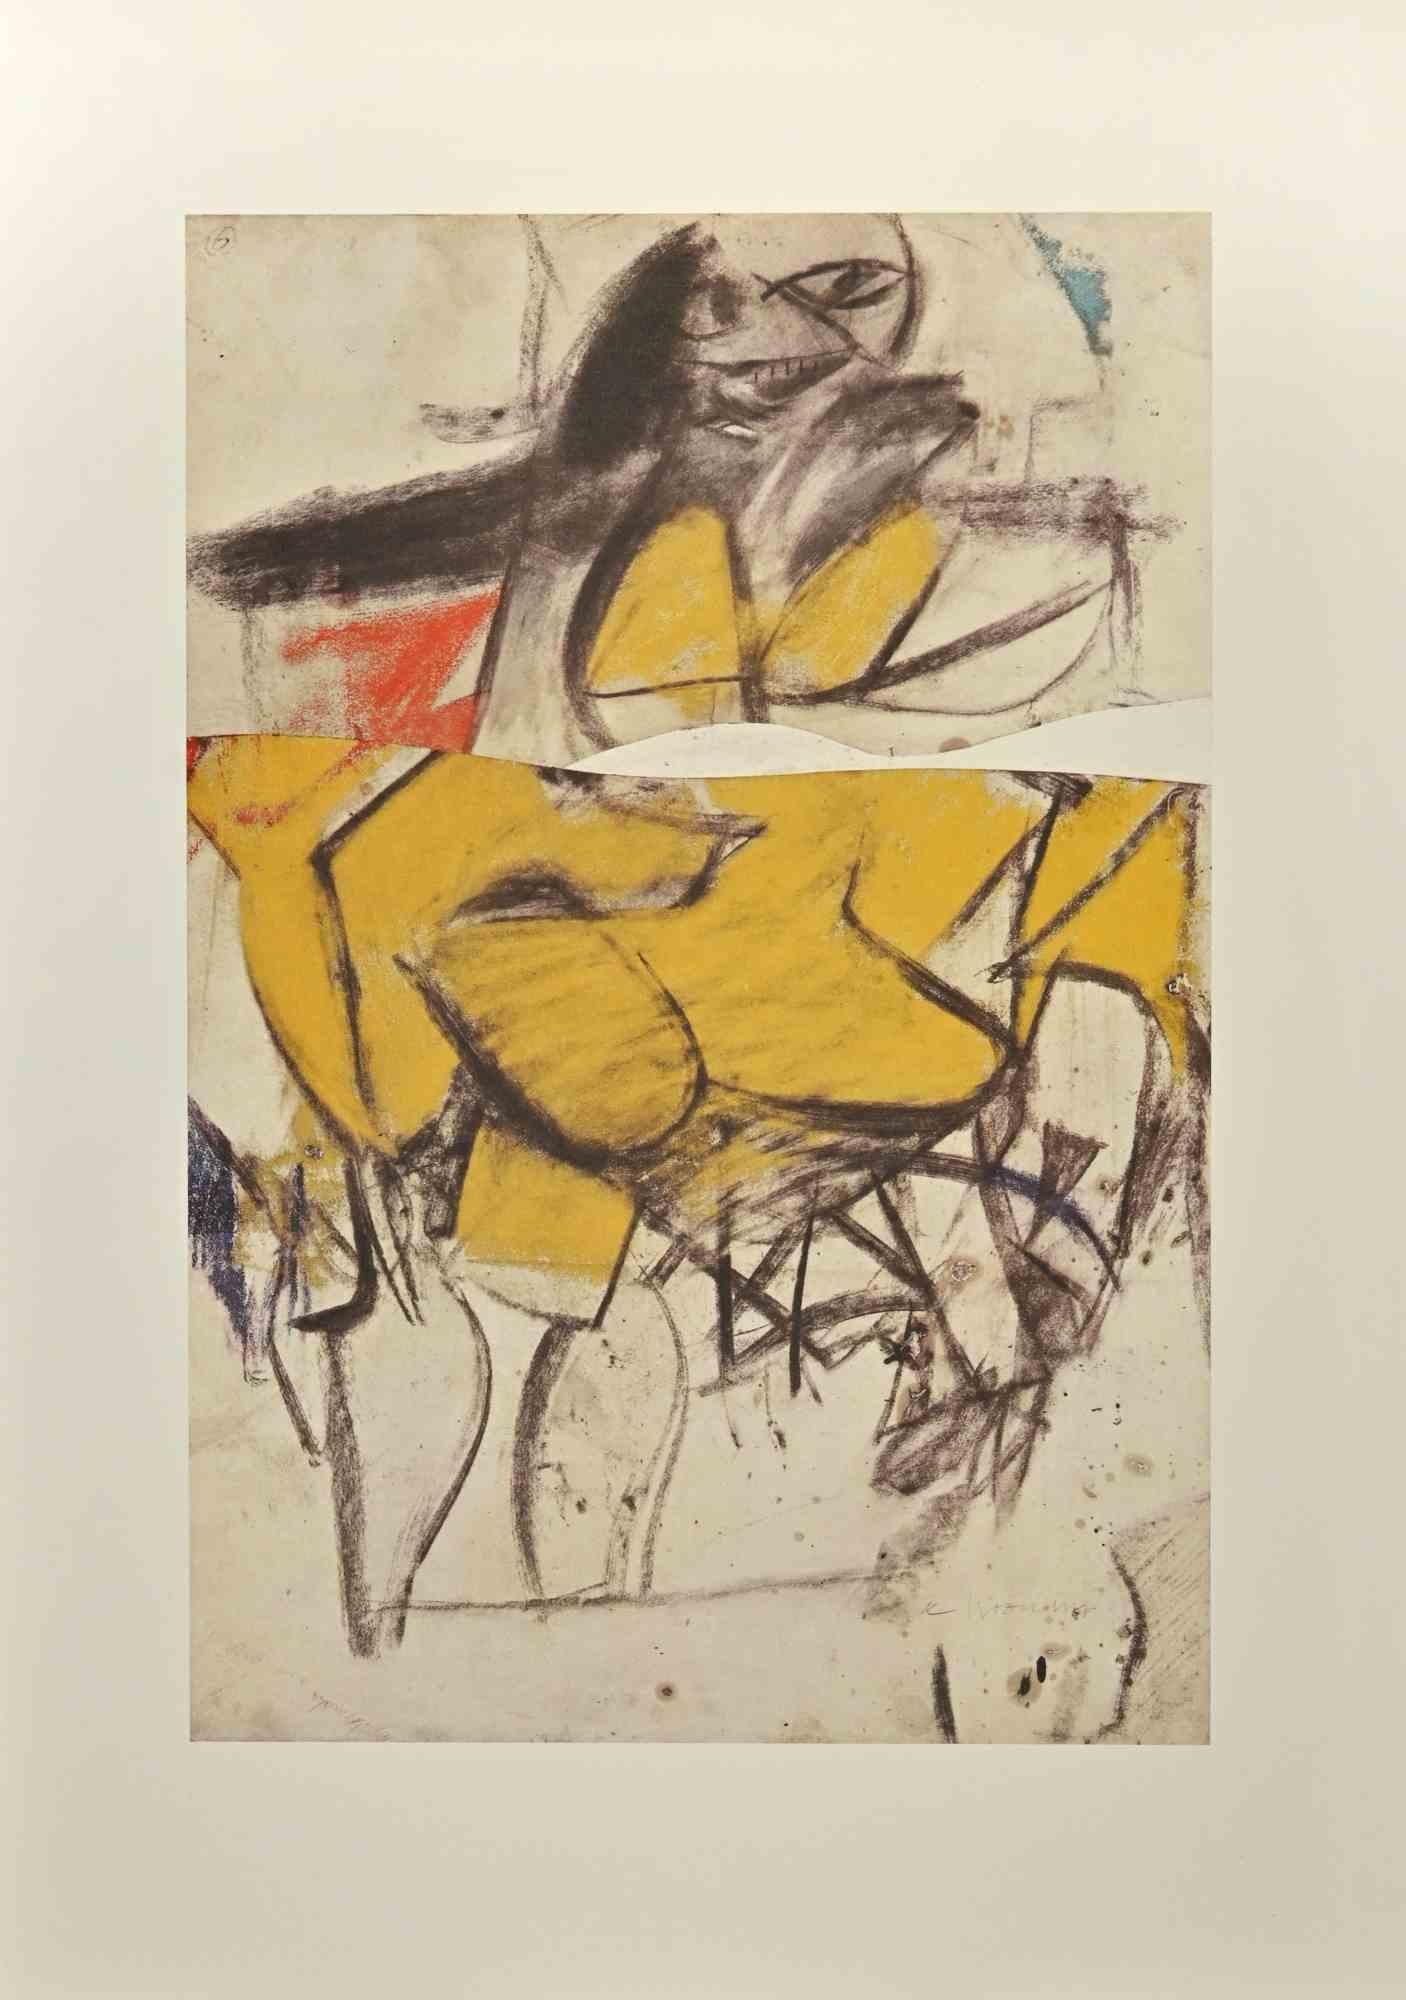 Willem de Kooning Abstract Print - Woman - Offset and Lithograph after Willem De Kooning - 1985